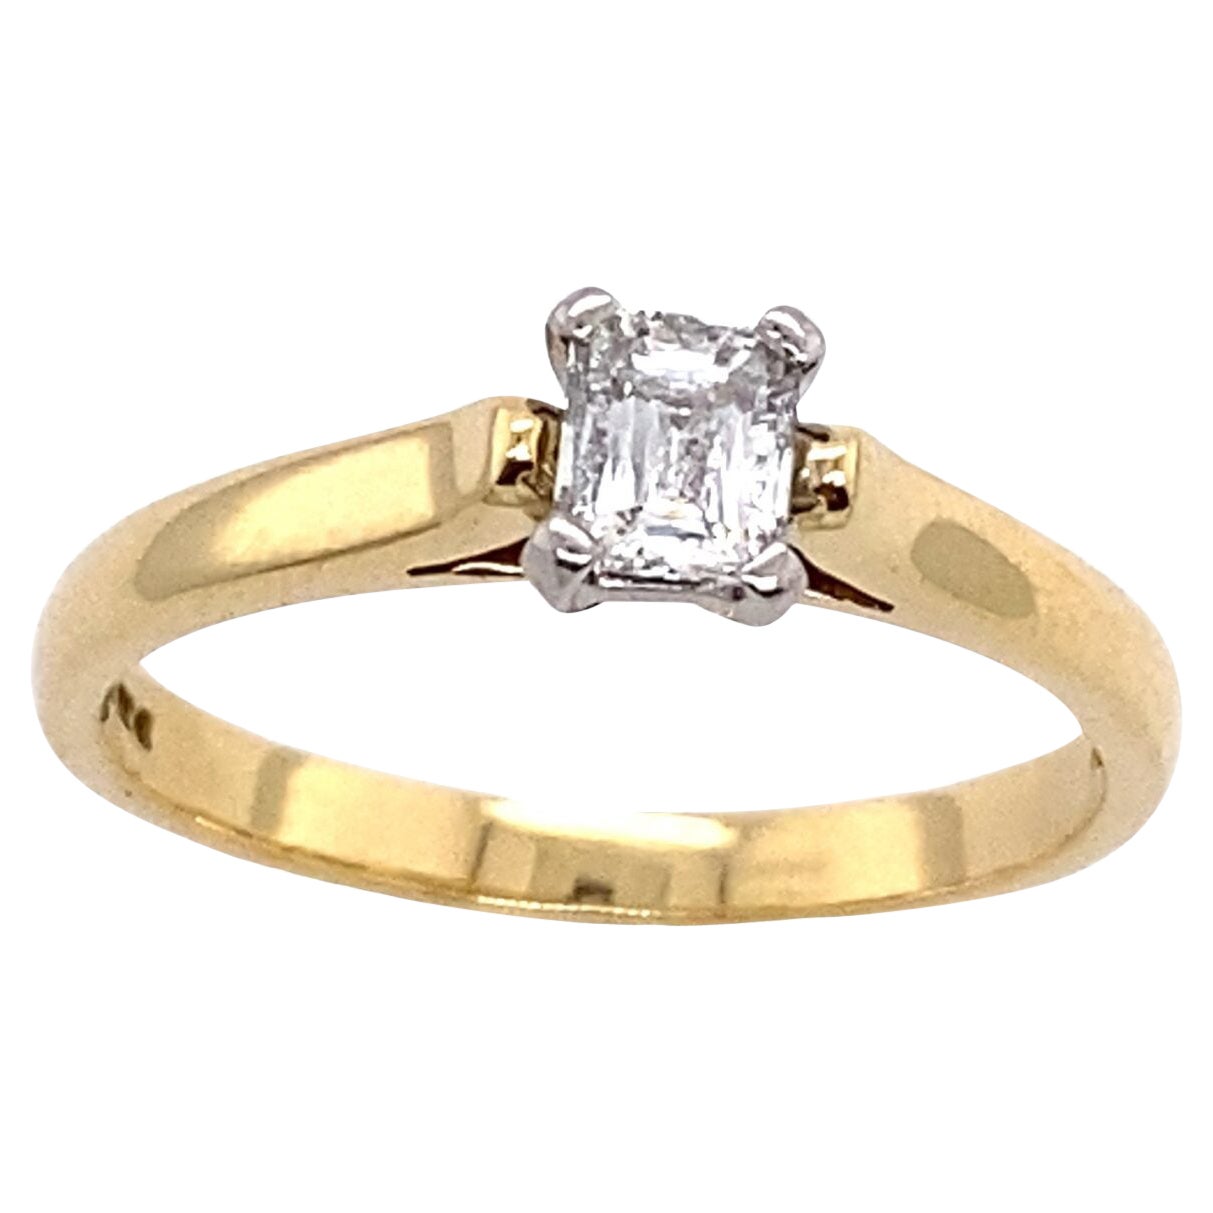 0.28ct G/VS1 Emerald Shape Criss-Cut Solitaire Ring in 18ct Yellow Gold